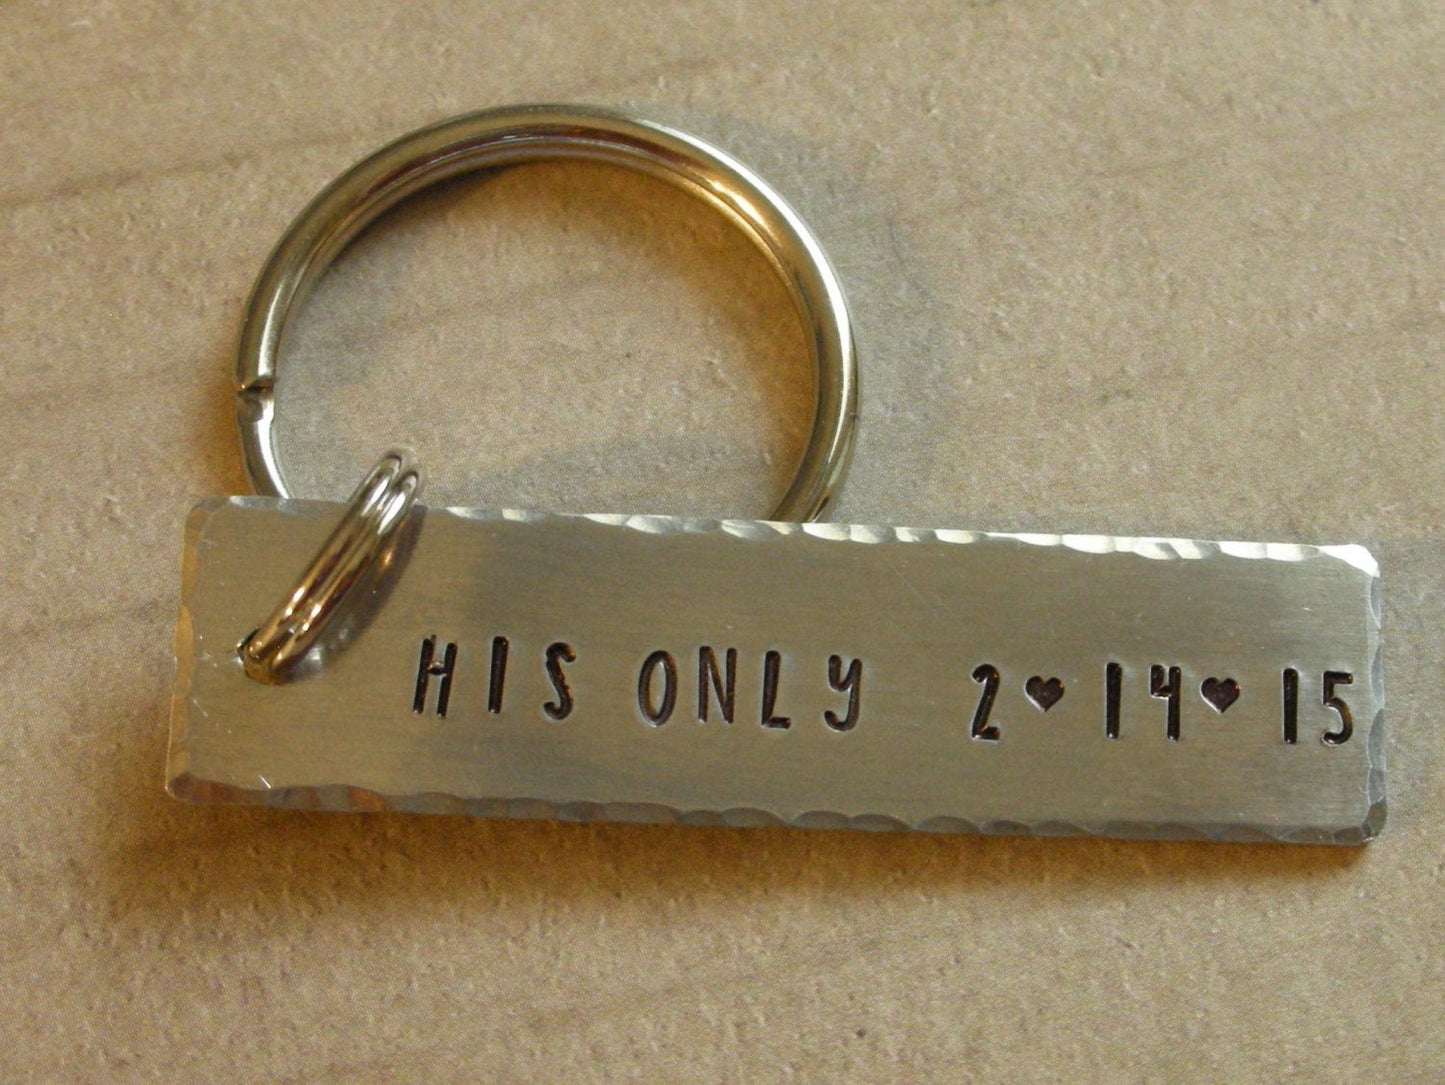 Couples Key Chain Set-Hand Stamped Couples Keychains-Her One His Only Gift for Valentines Day-Gift for Bride & Groom-Weddng Gift-Shower Gift